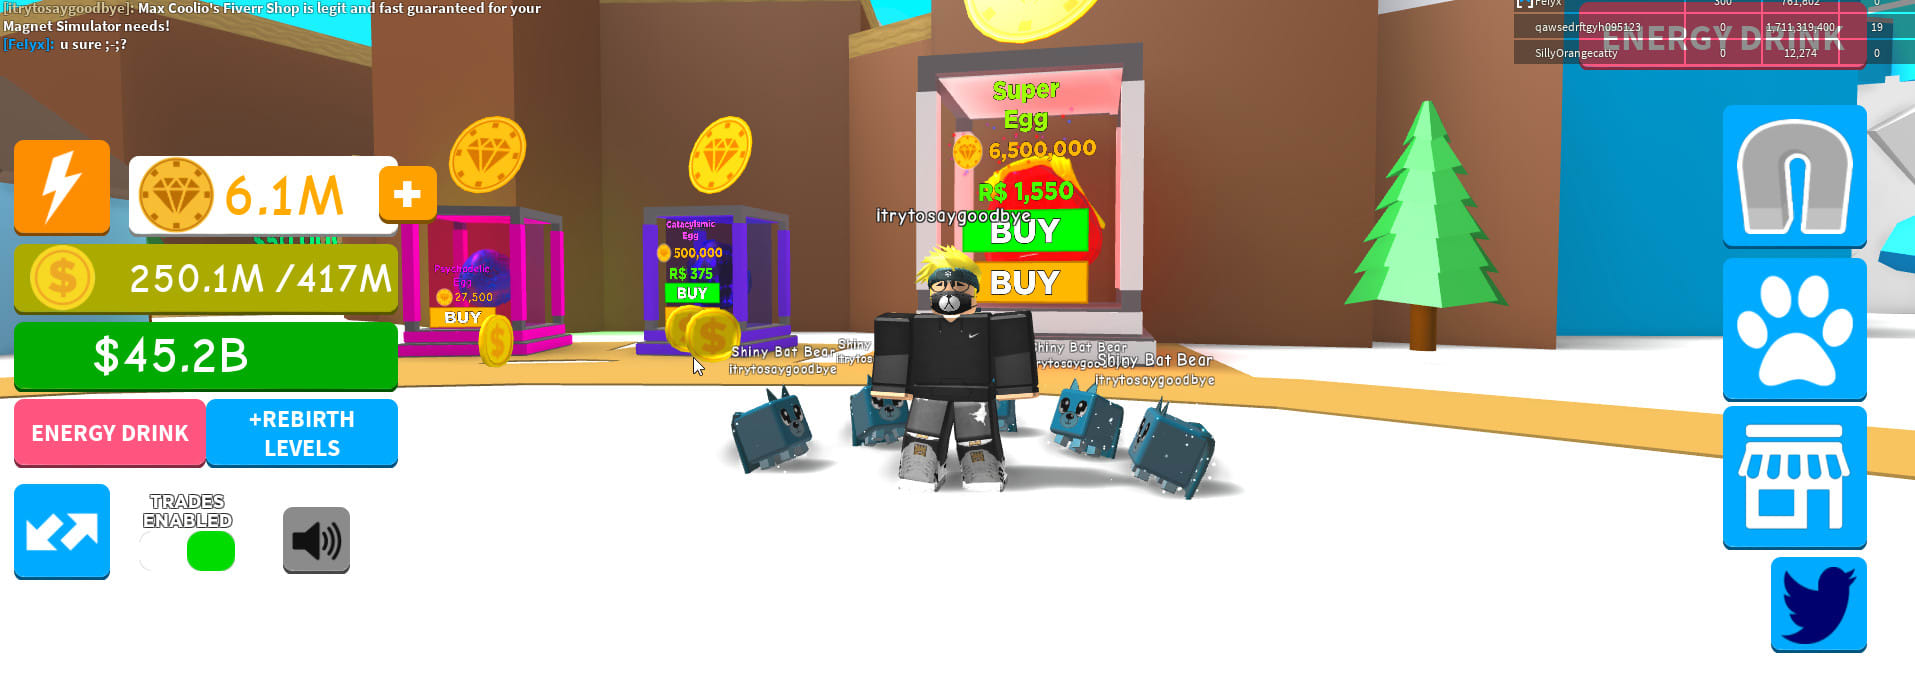 Sell You The Best Pet In Magnet Simulator For Cheap By Max Coolio